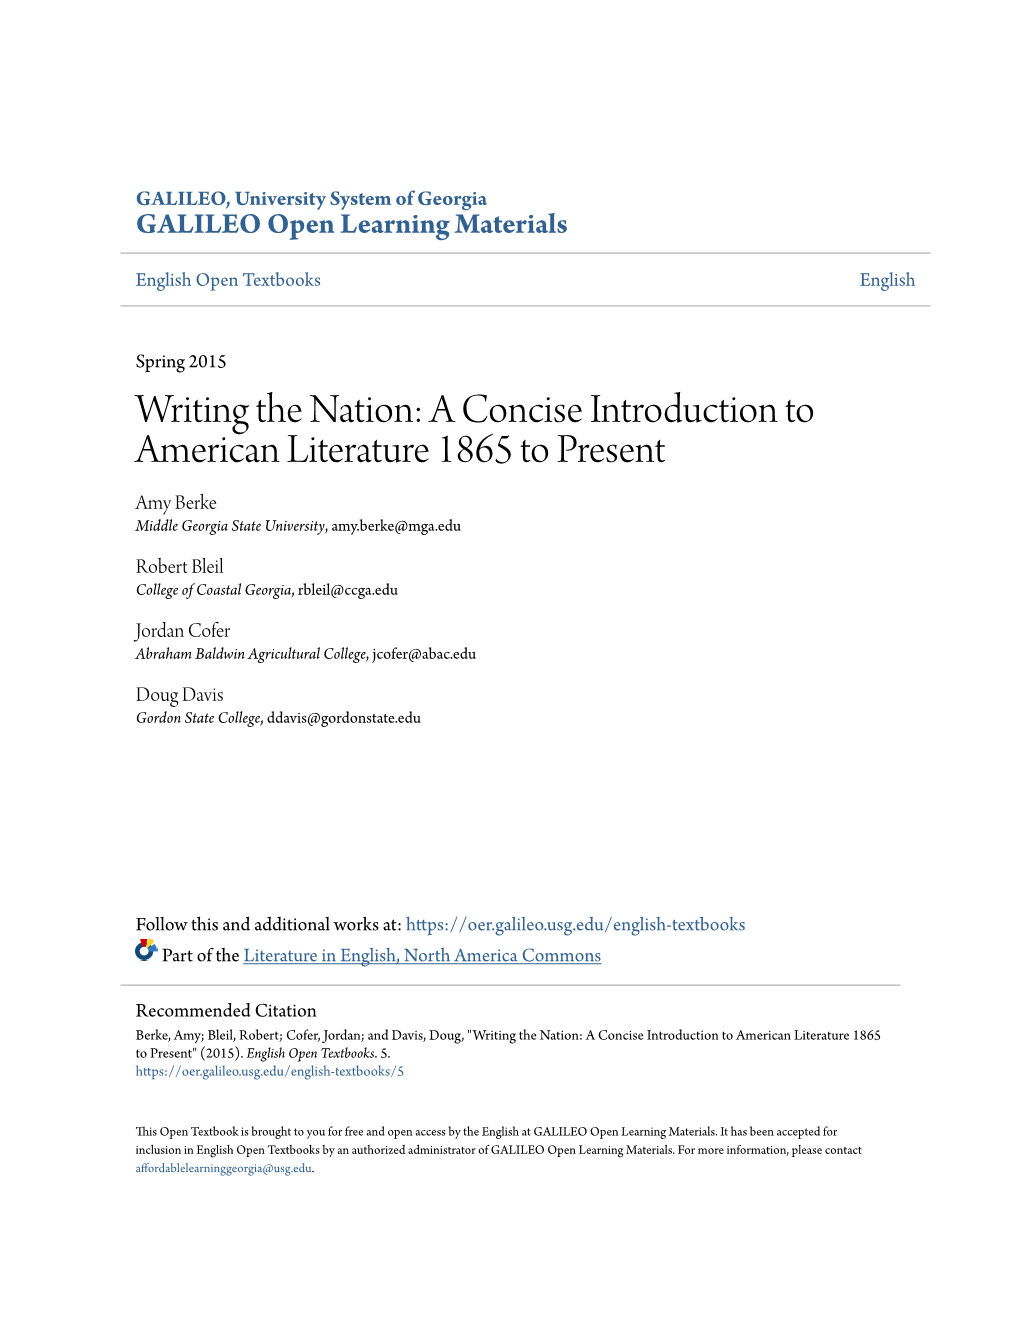 Writing the Nation: a Concise Introduction to American Literature 1865 to Present Amy Berke Middle Georgia State University, Amy.Berke@Mga.Edu